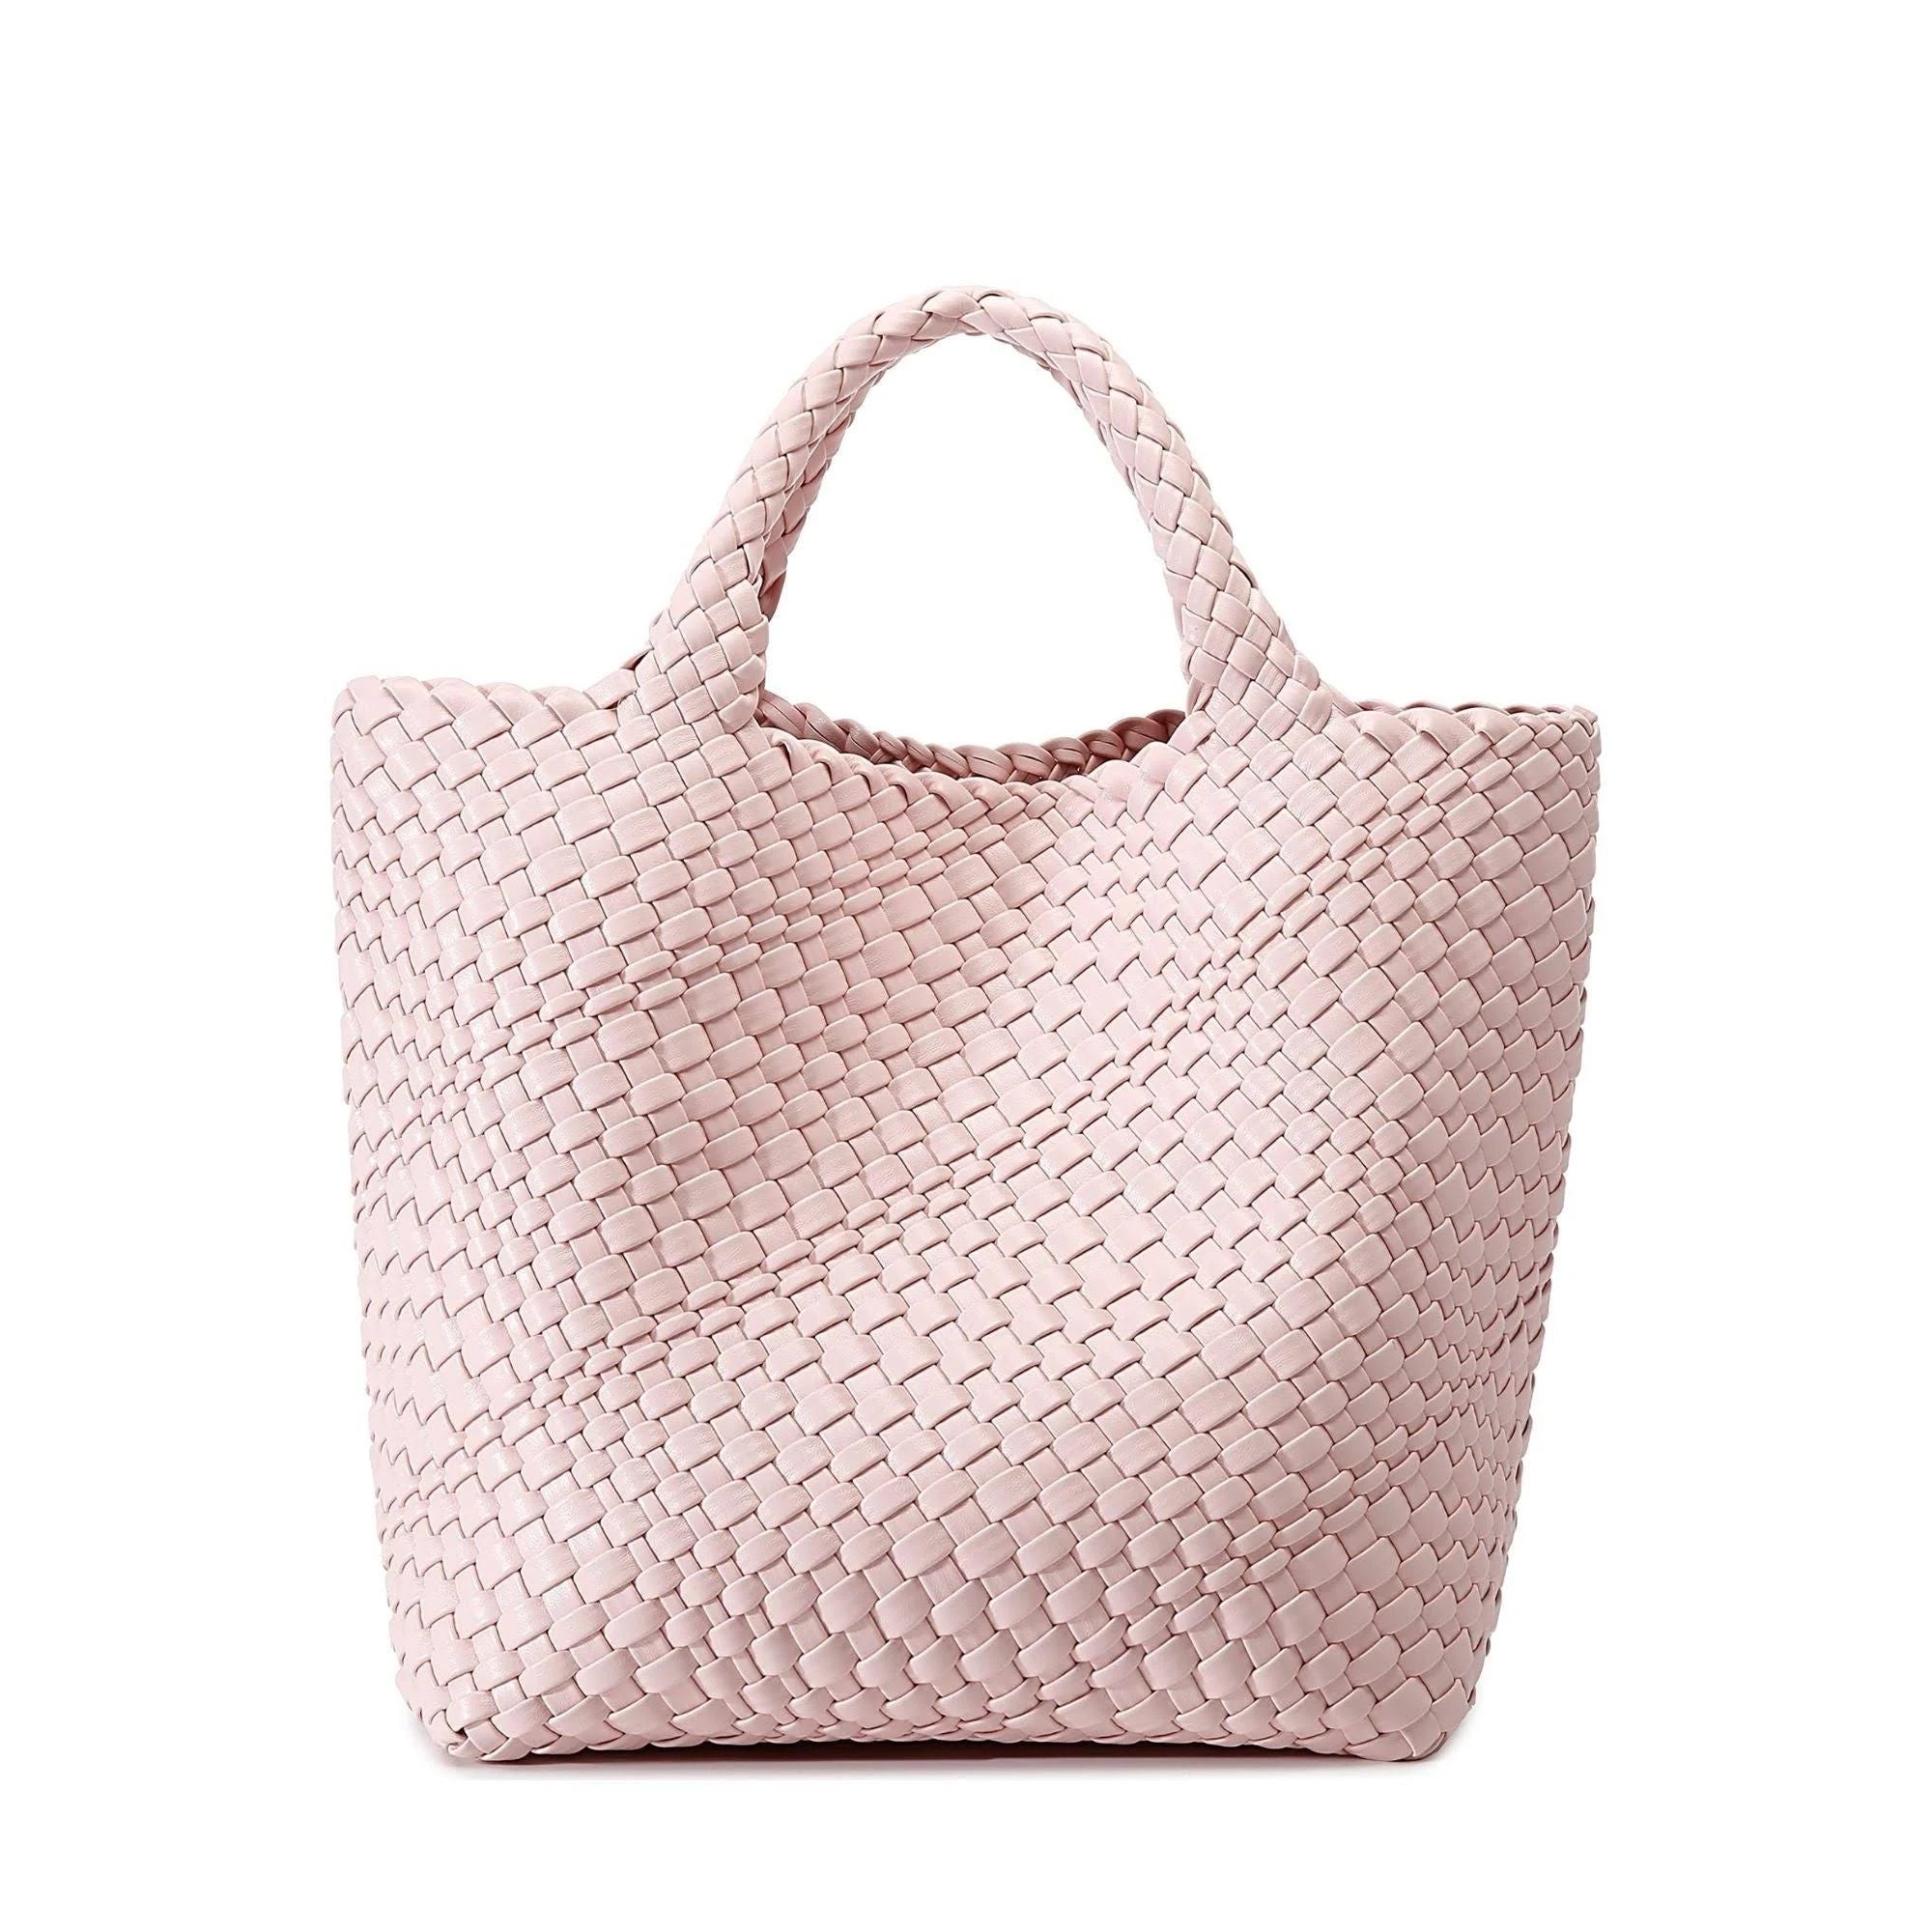 Fashionable Vegan Leather Woven Tote Handbag for Summer Travel and Daily Use | Image